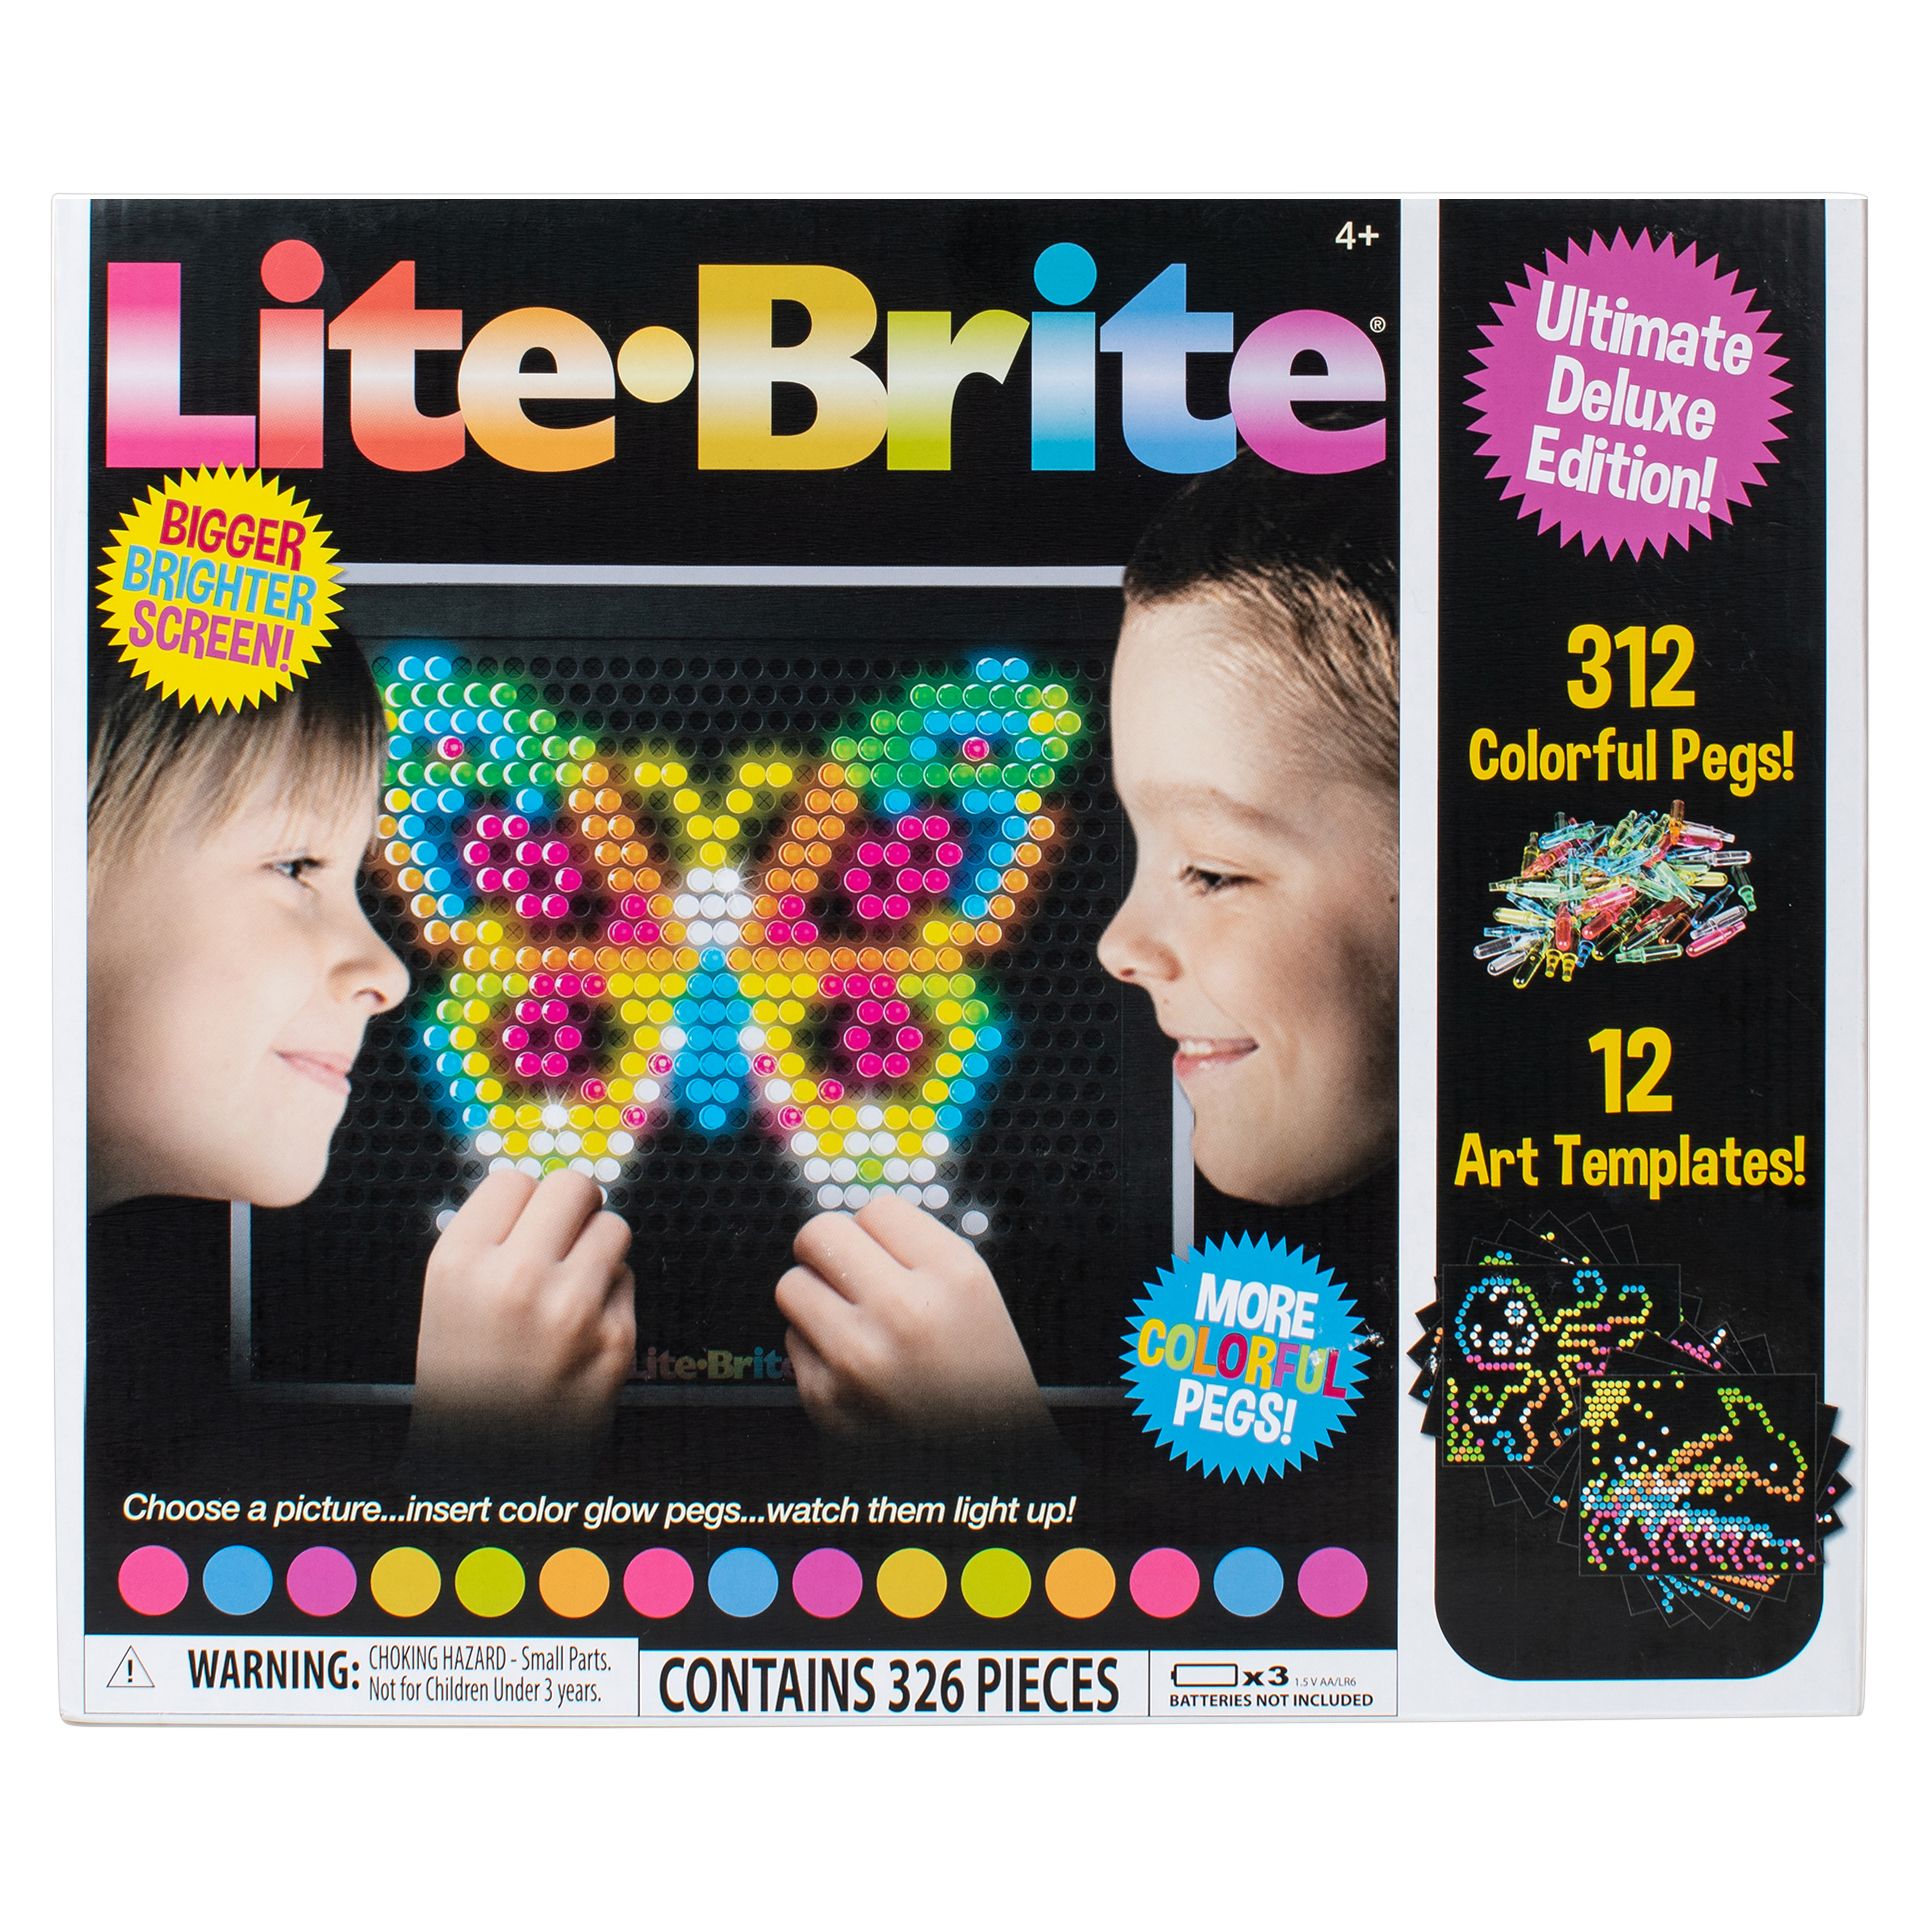 NEW Lite Brite Ultimate Classic With Templates And 200 Colored Pegs 